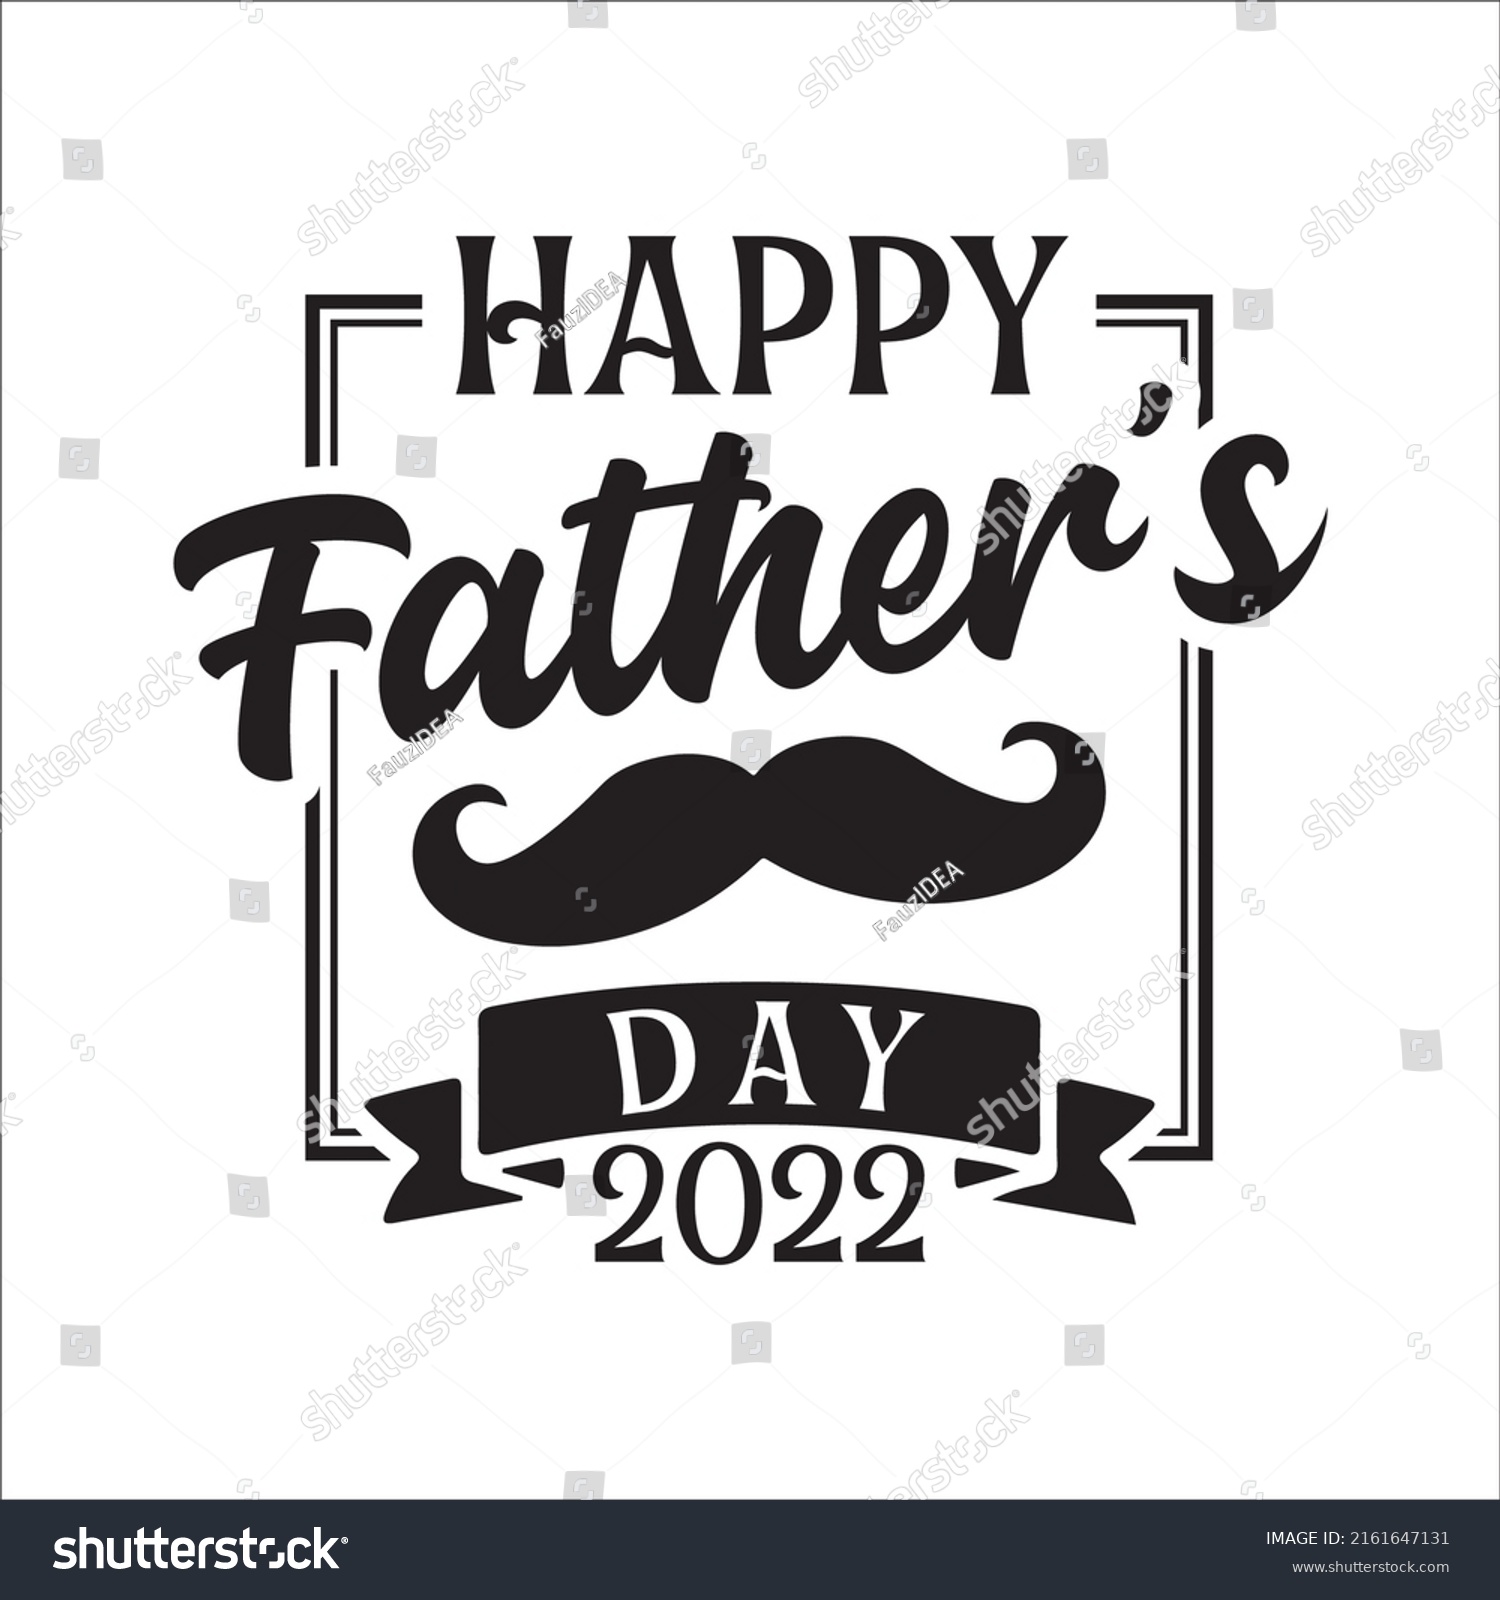 SVG of Happy Father's Day 2022 svg eps design svg